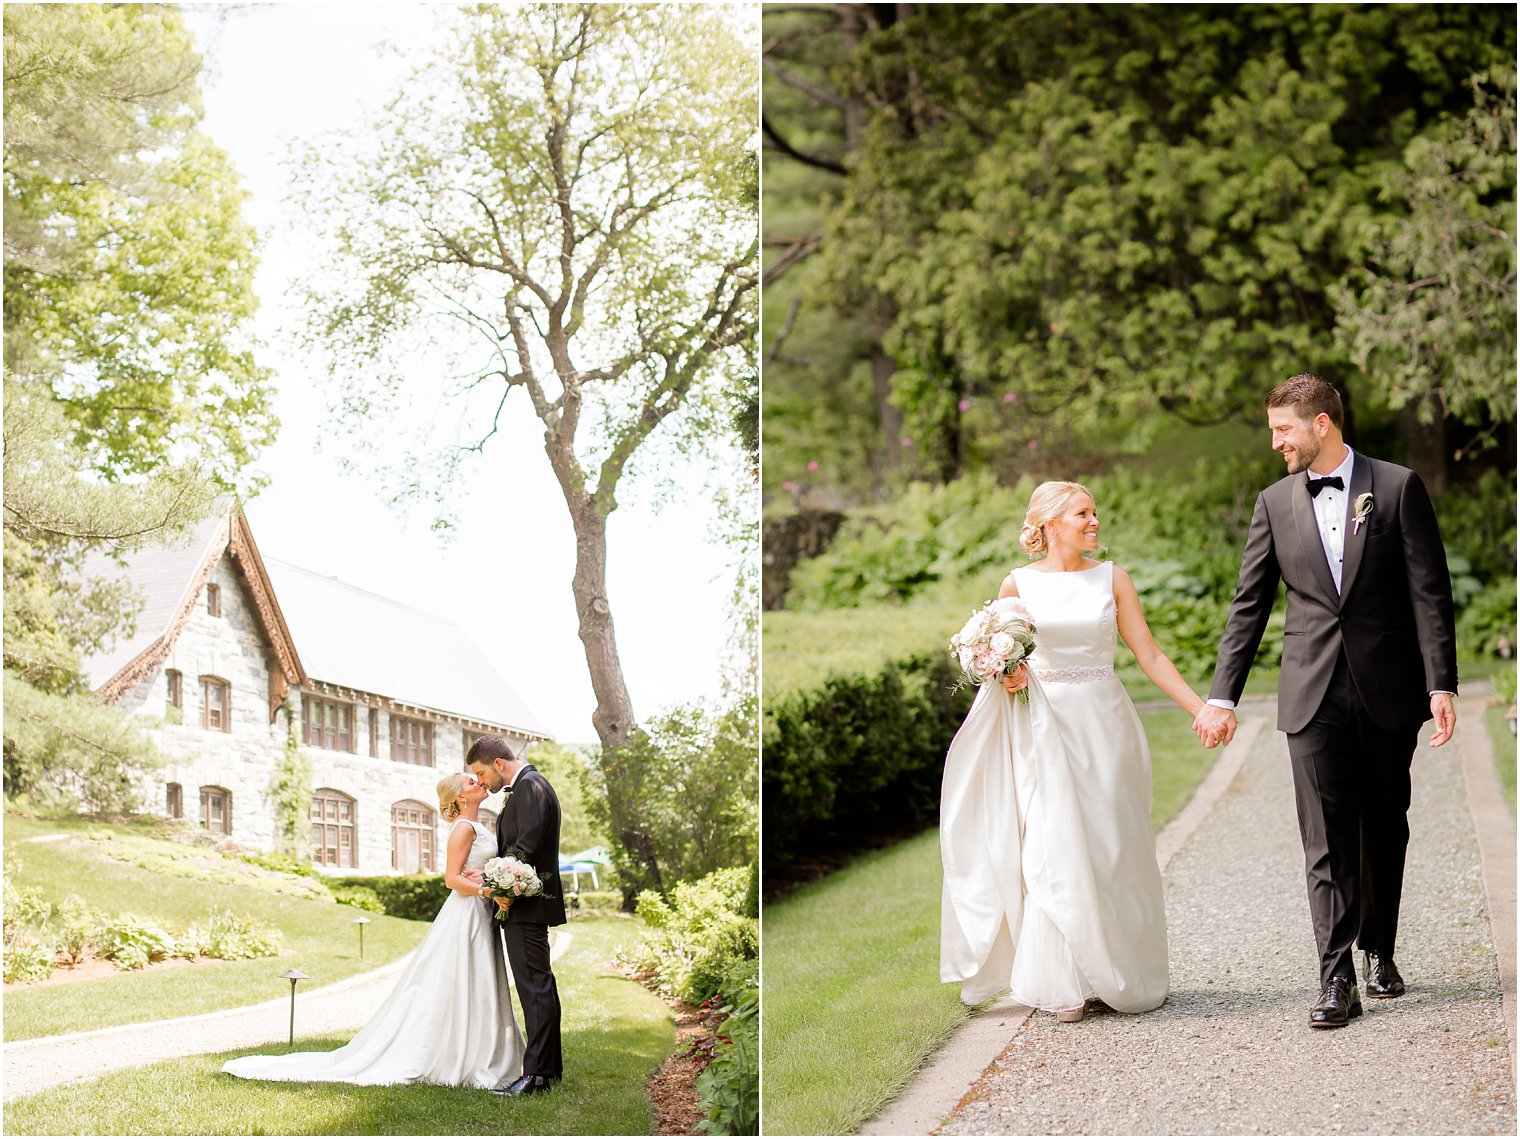 Candid wedding photos at Castle Hill Resort and Spa